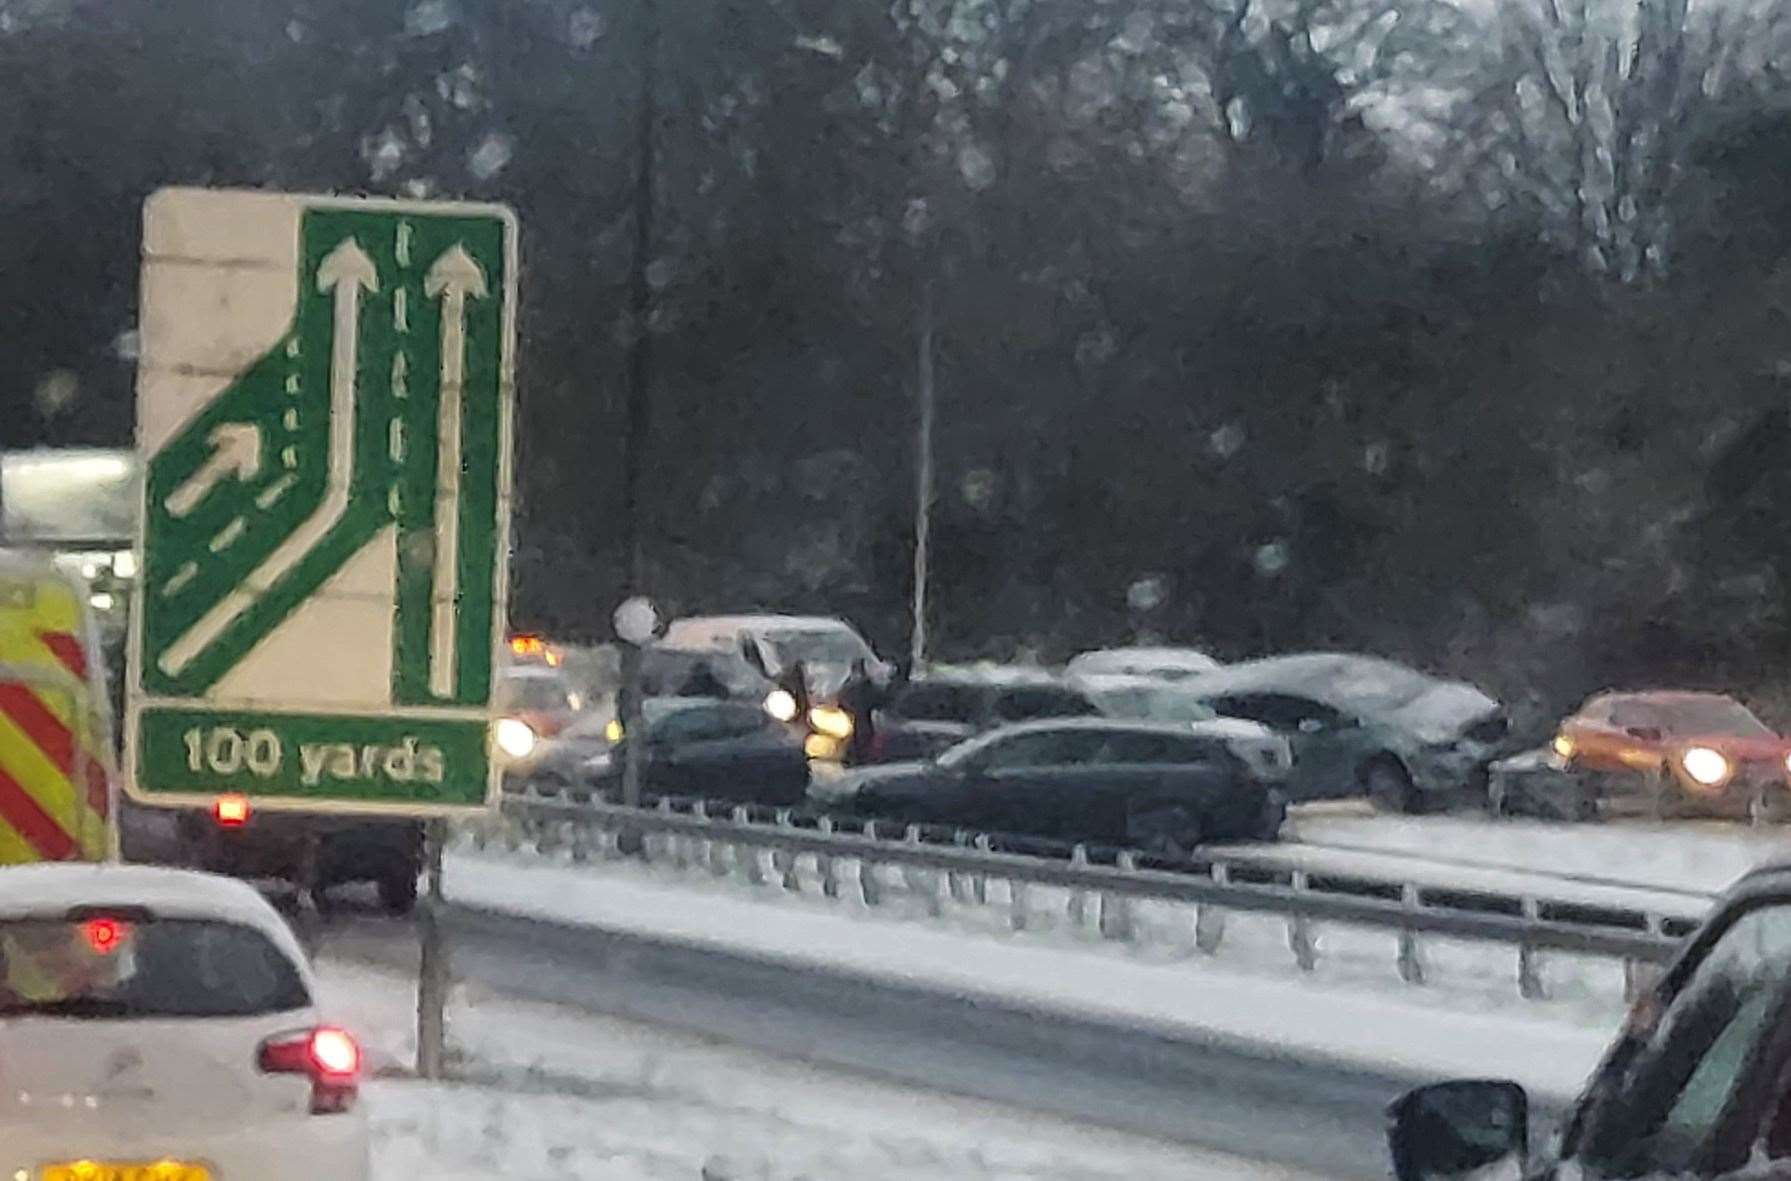 The scene of a three-car crash on the A229 London-bound carriageway near Blue Bell Hill